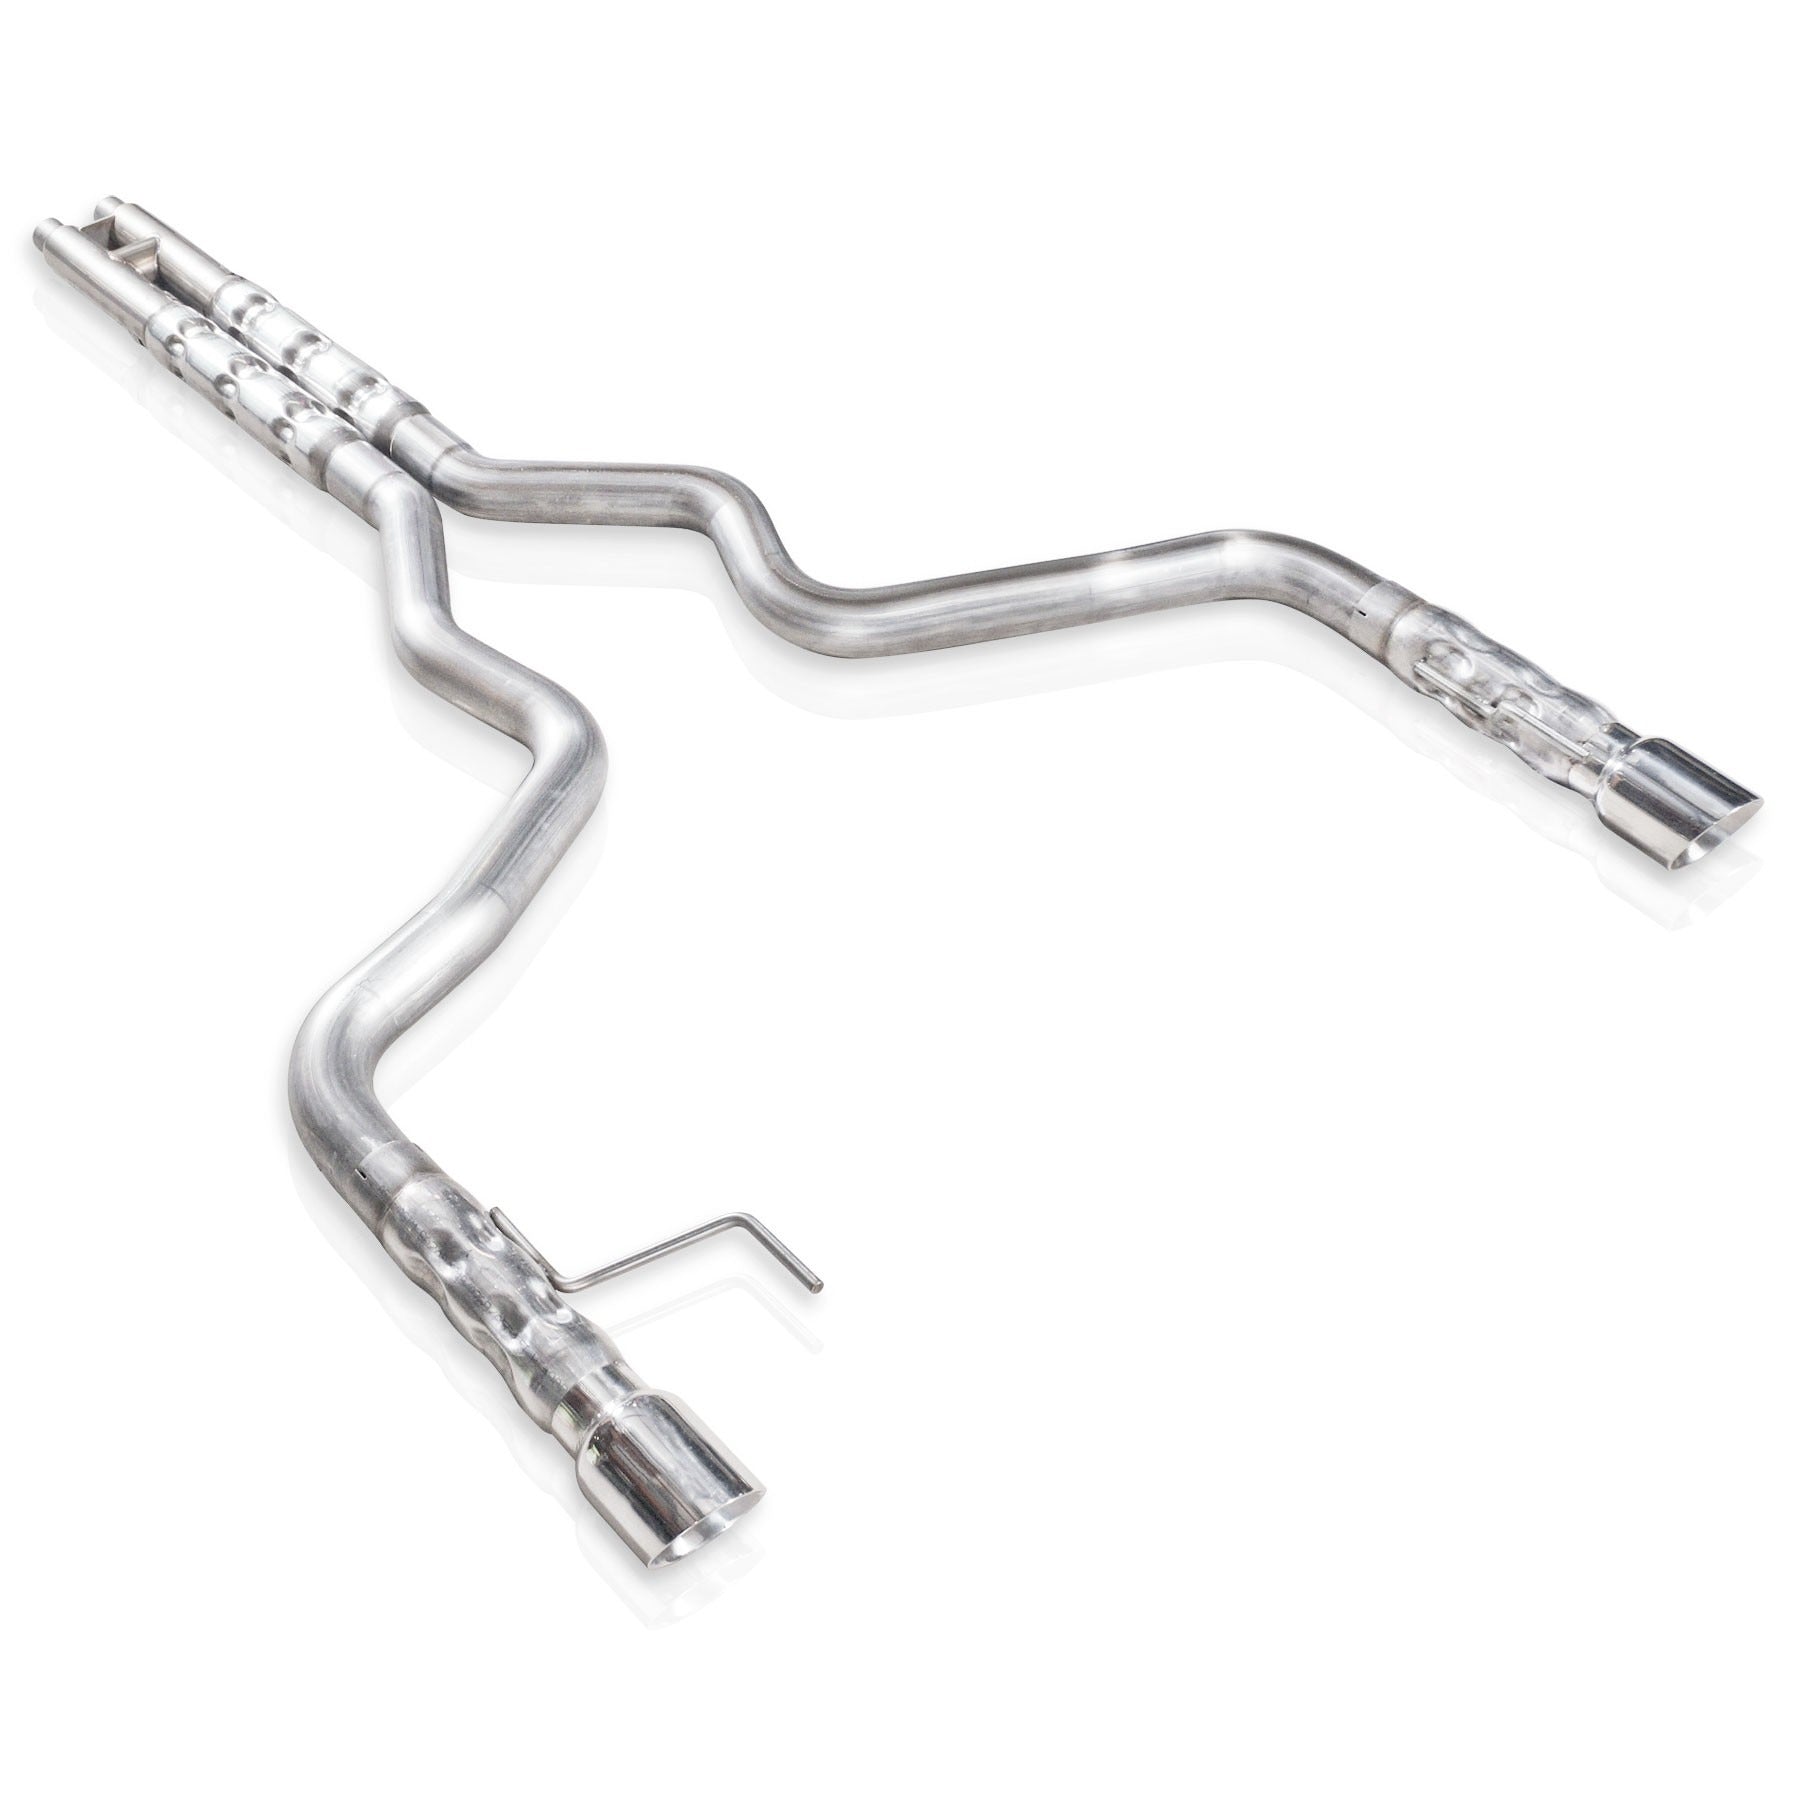 STAINLESS WORKS Mustang GT 5.0L 2015-2017 Cat-Back Exhaust Factory Connect H Pipe w/ 2.5" Muffler - Stainless (2015-2017 GT 5.0L